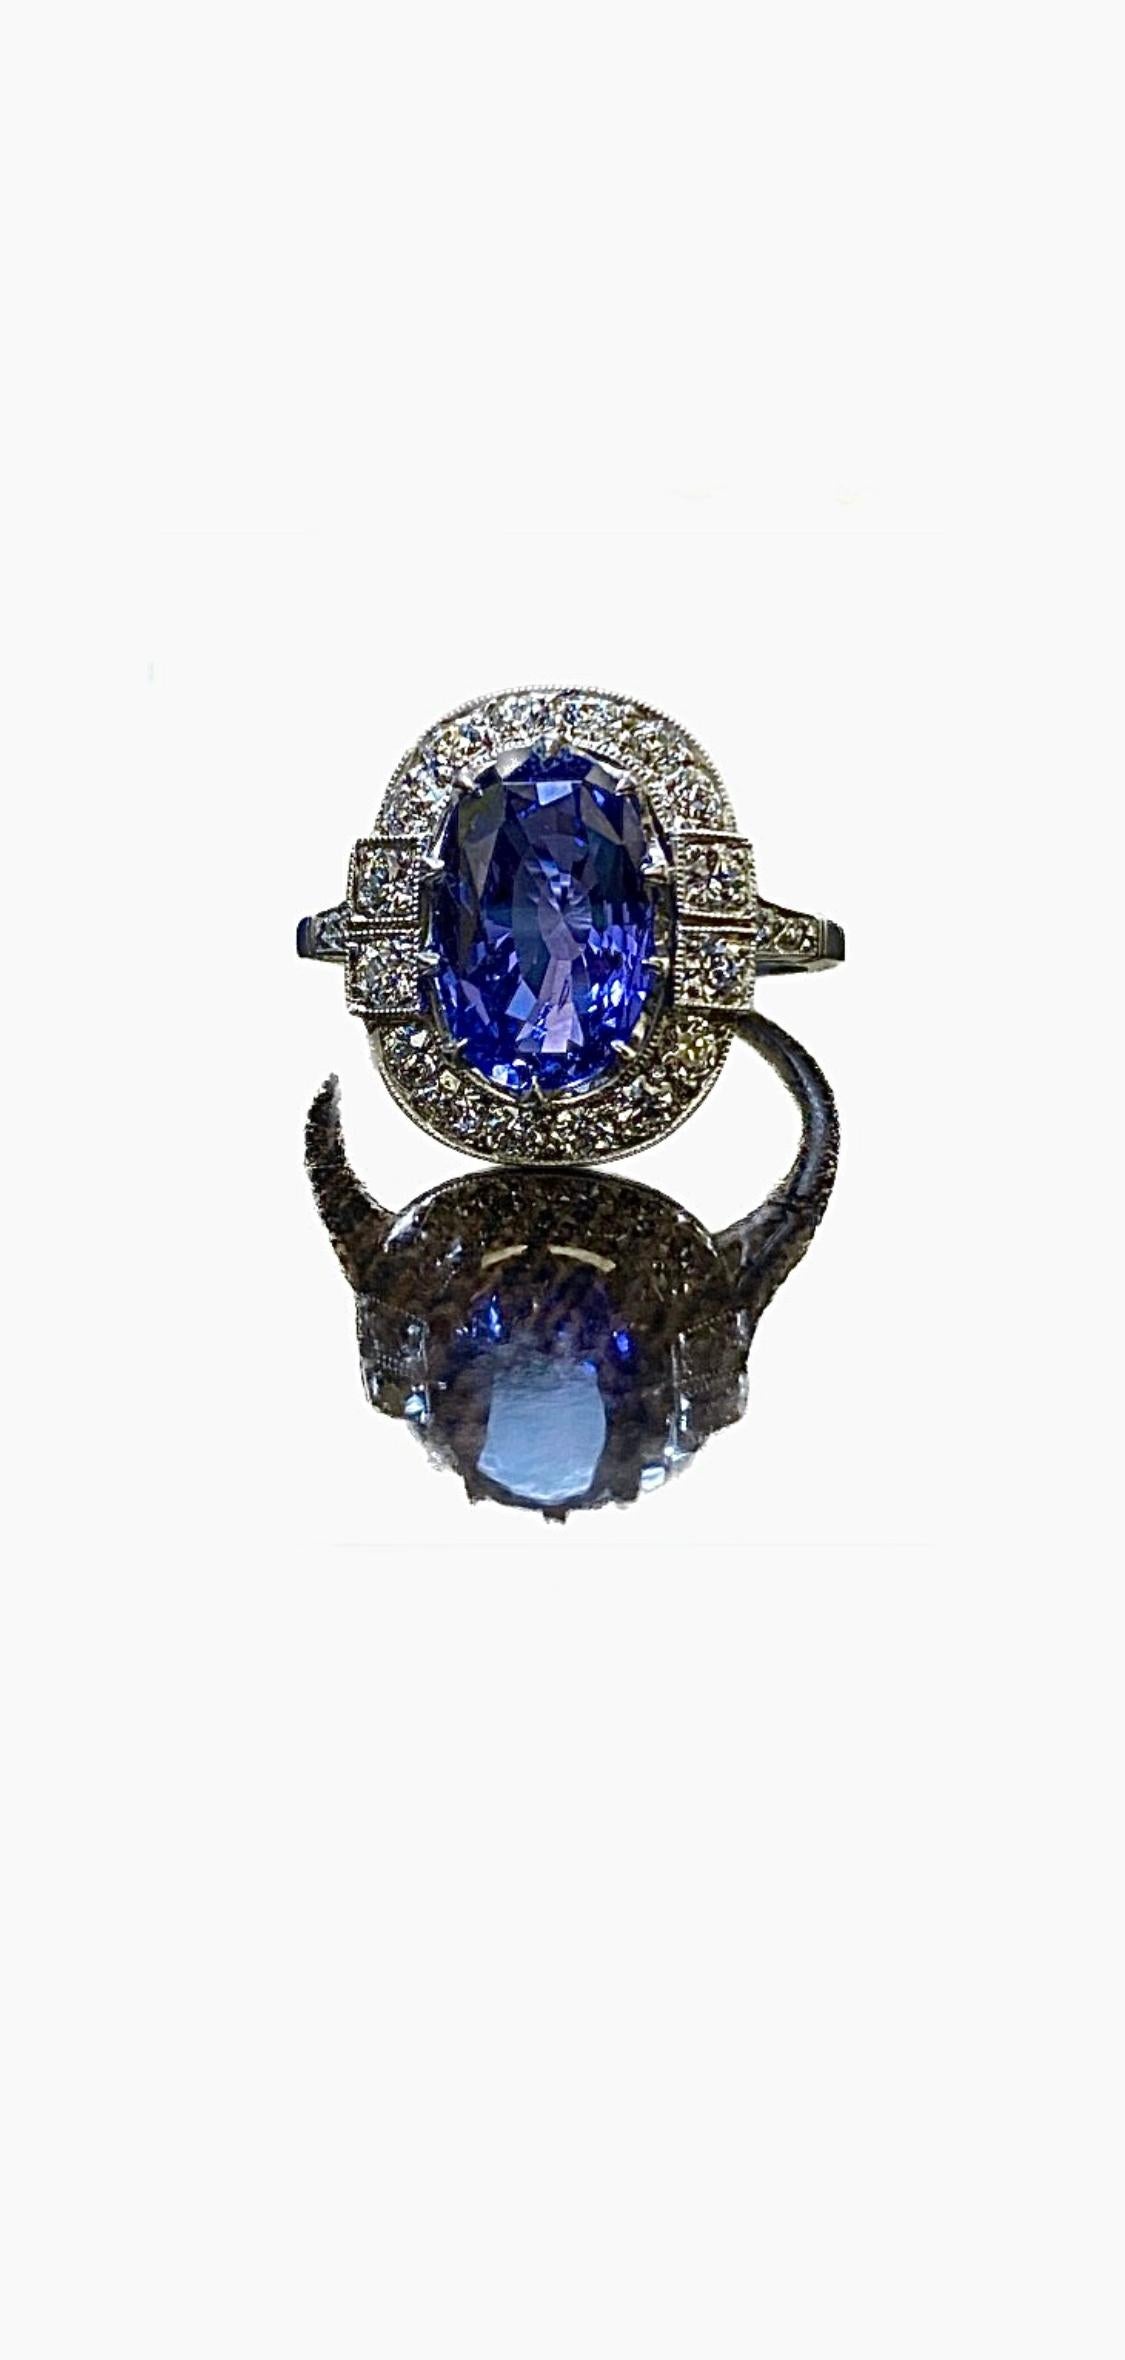 Platinum Diamond GIA Certified 3.88 Carat Color Change Sapphire Engagement Ring For Sale 6